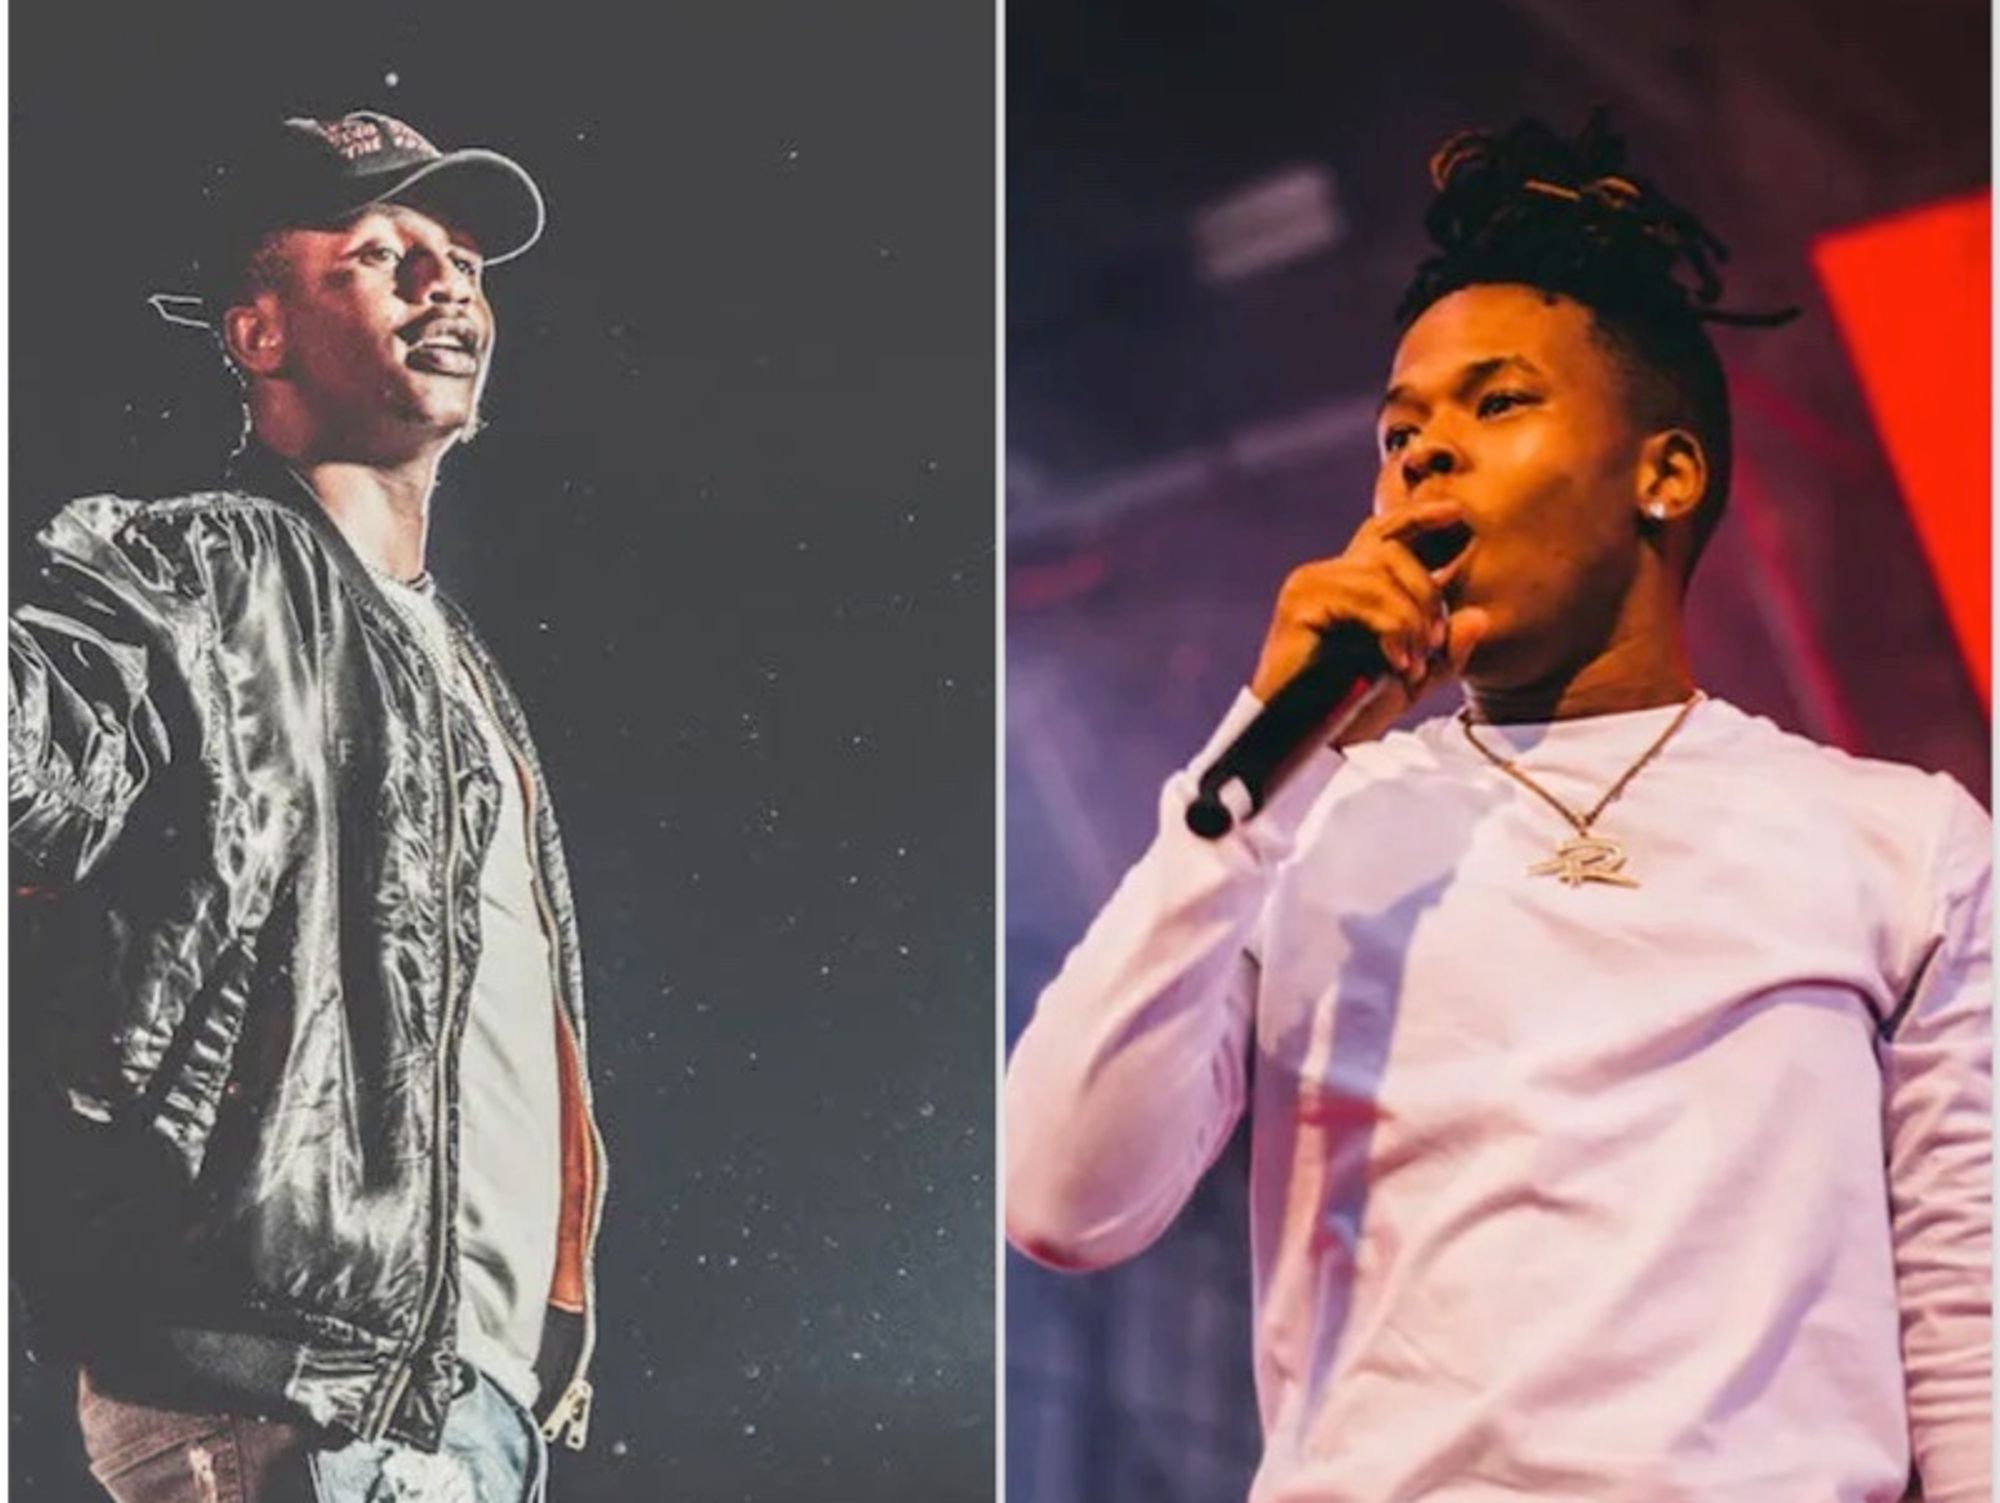 A collage of two images showing Emtee and Nasty each on stage. 